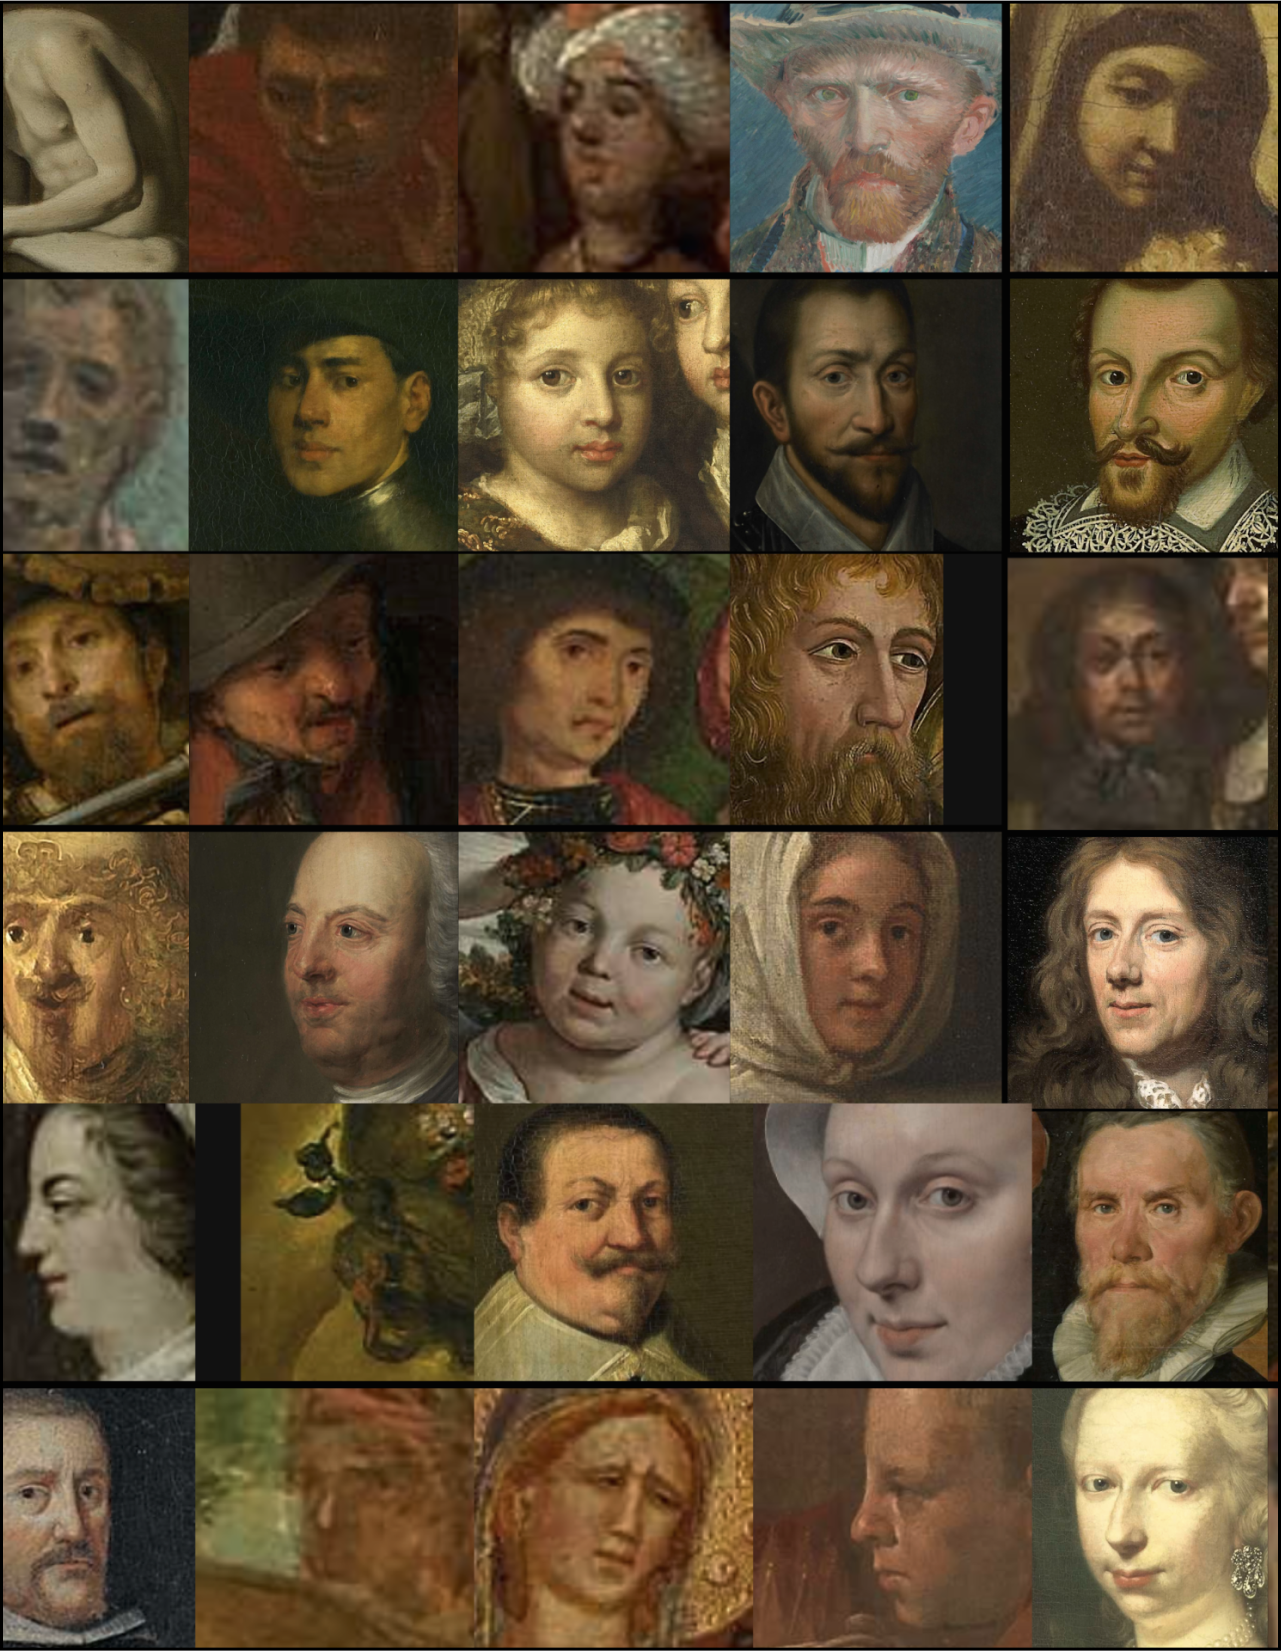 Mosaic of painted, expressive faces from the Rijksmuseum (2 of 2 images)